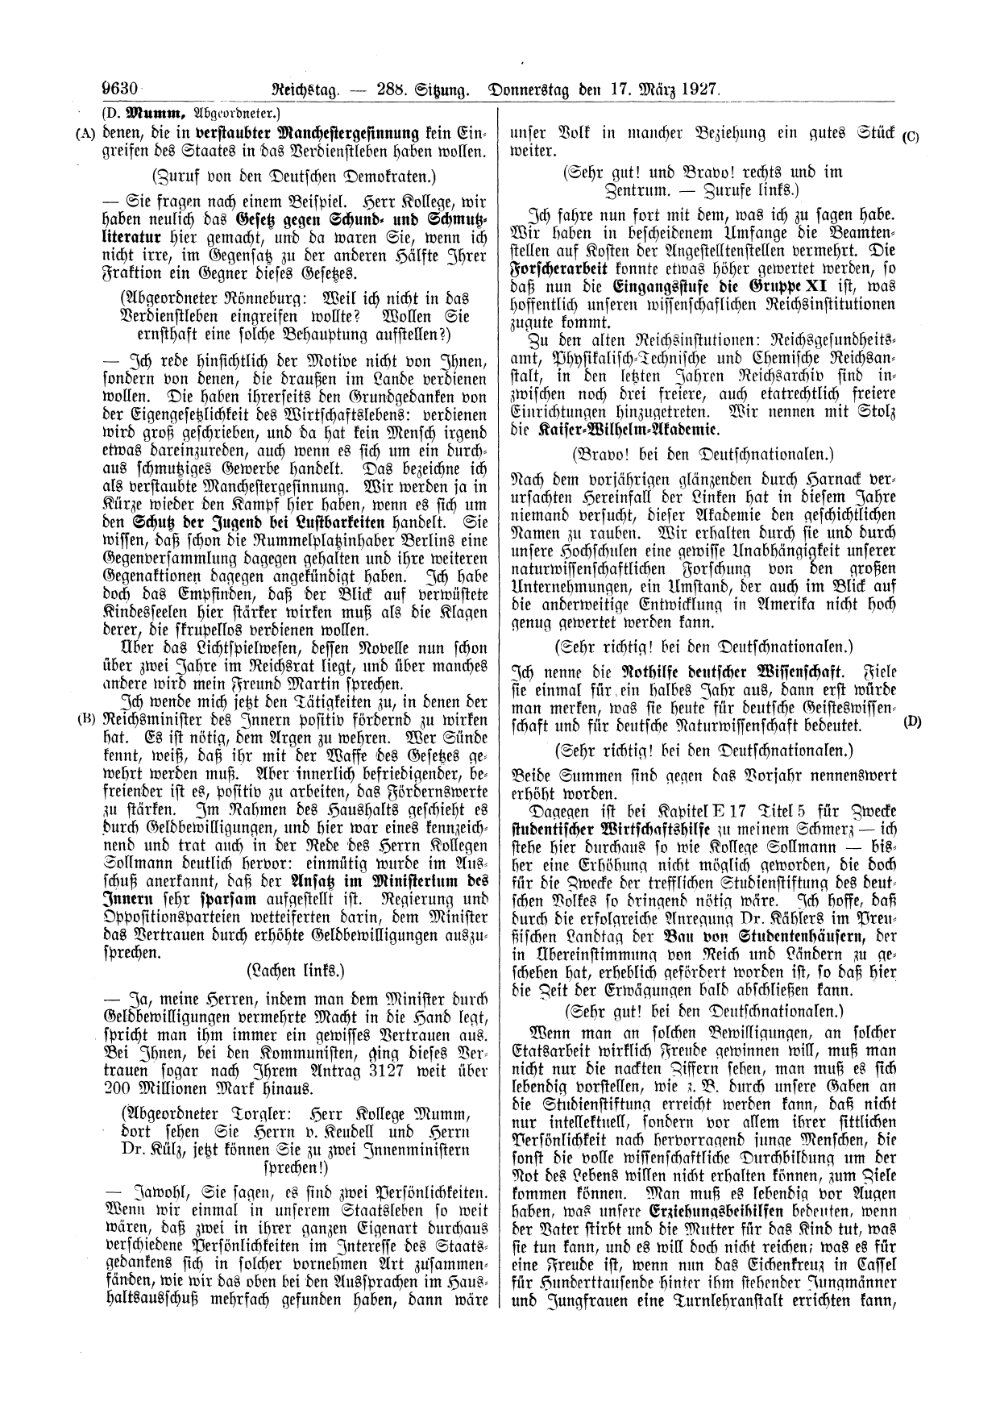 Scan of page 9630